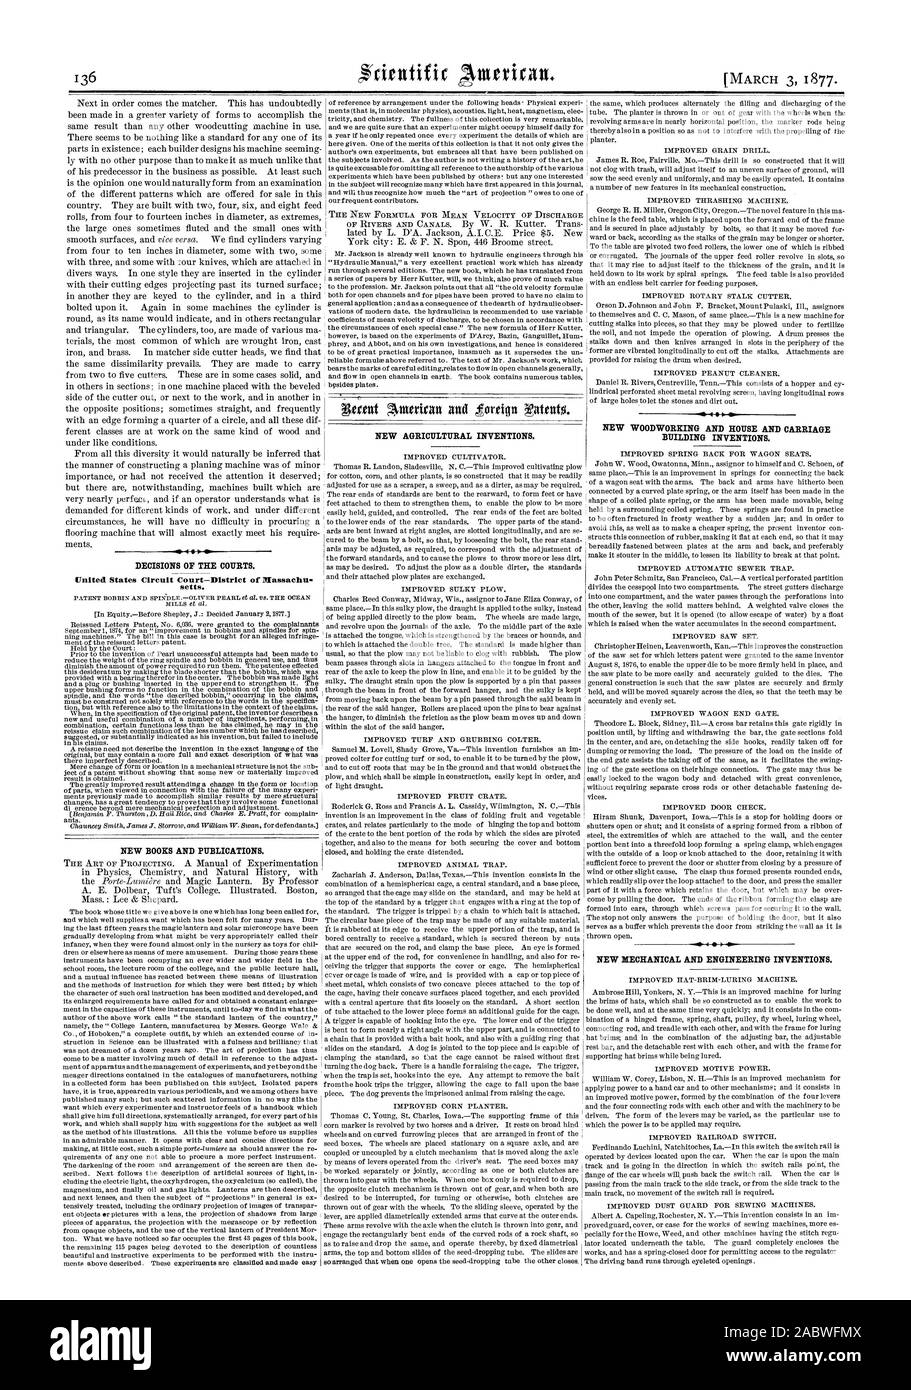 NEW AGRICULTURAL INVENTIONS. DECISIONS OF THE COURTS. United States Circuit Court—District of Massachu setts. NEW BOOKS AND PUBLICATIONS. NEW WOODWORKING AND HOUSE AND CARRIAGE BUILDING INVENTIONS. NEW MECHANICAL AND ENGINEERING INVENTIONS., scientific american, 1877-03-03 Stock Photo